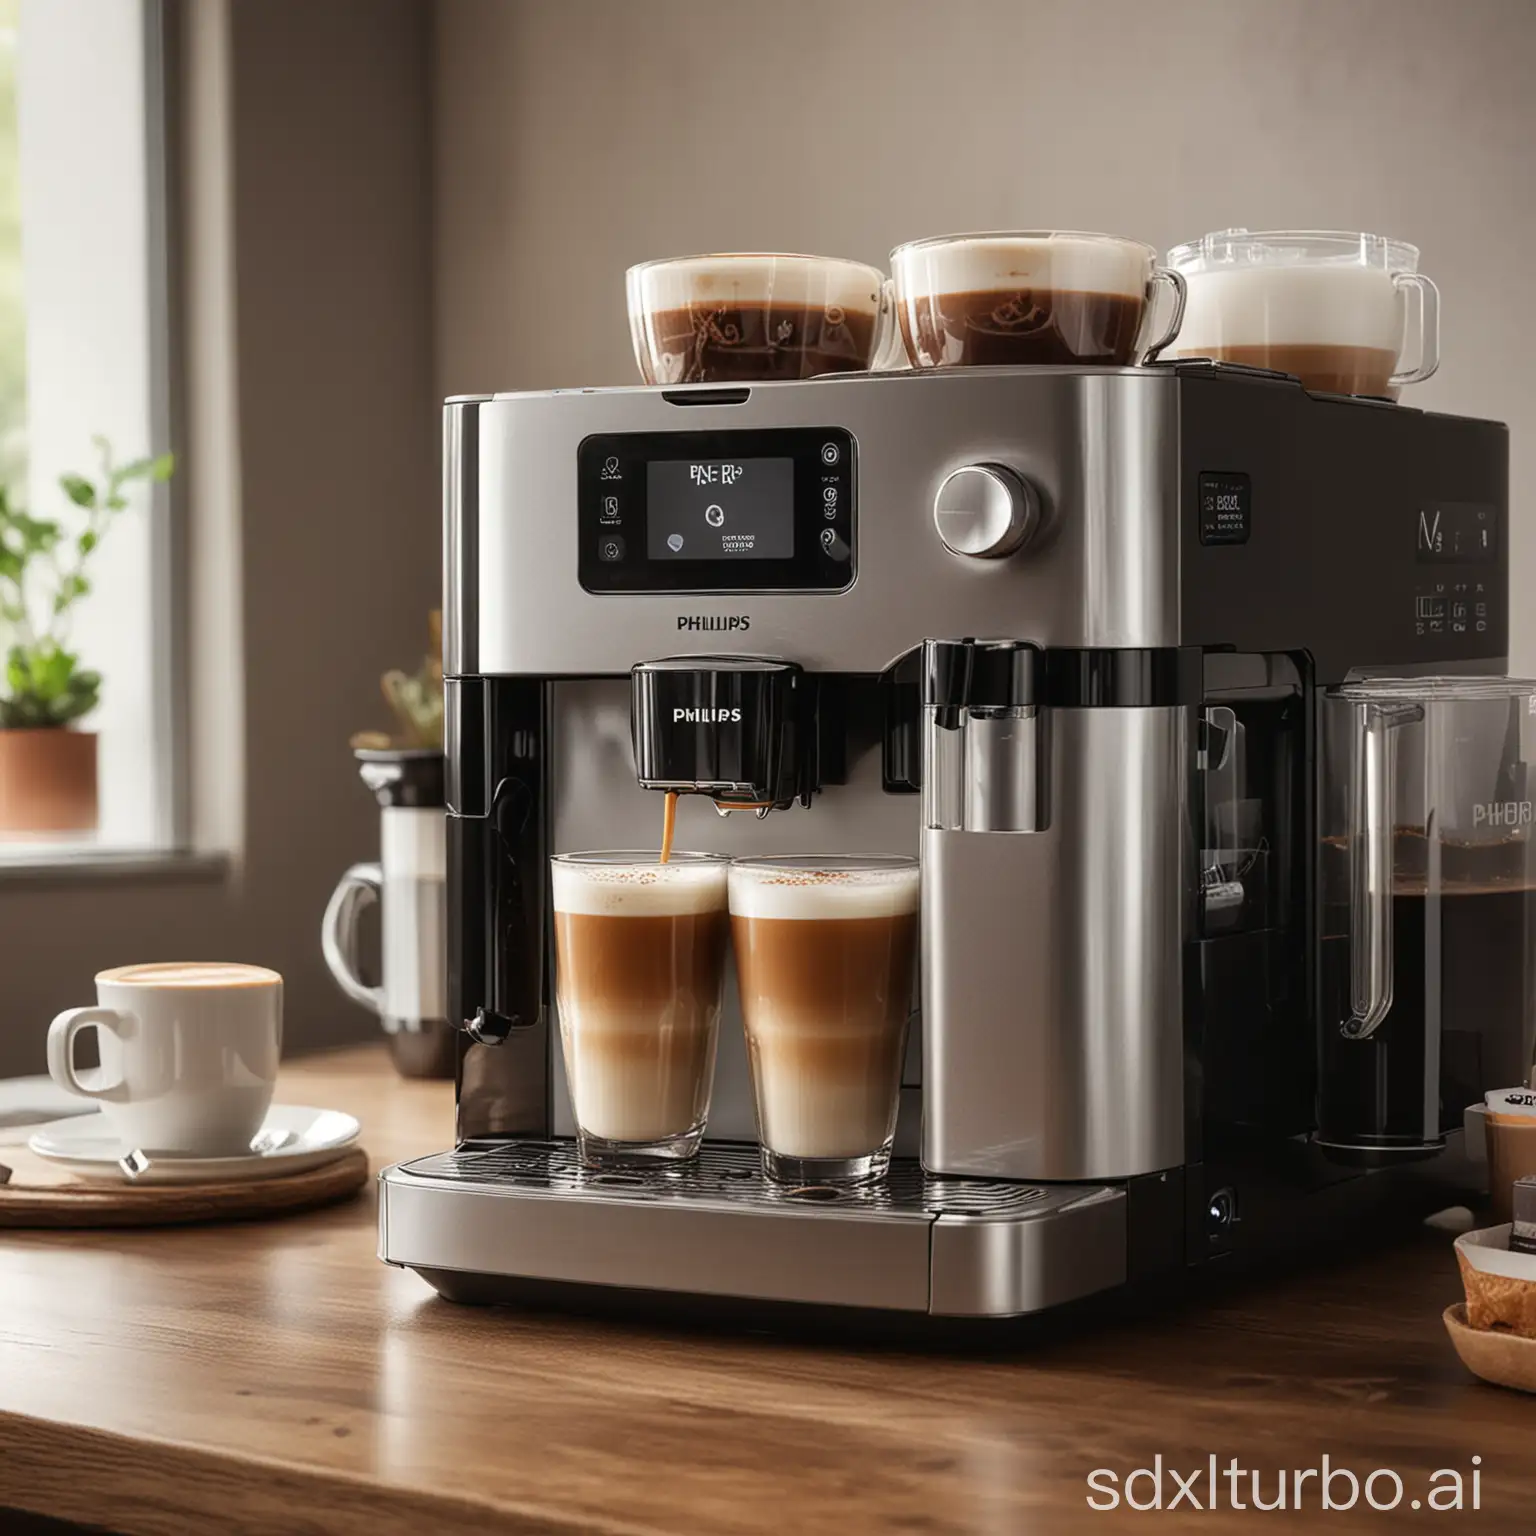 Life style drinking coffee from phillips full automated coffee machine